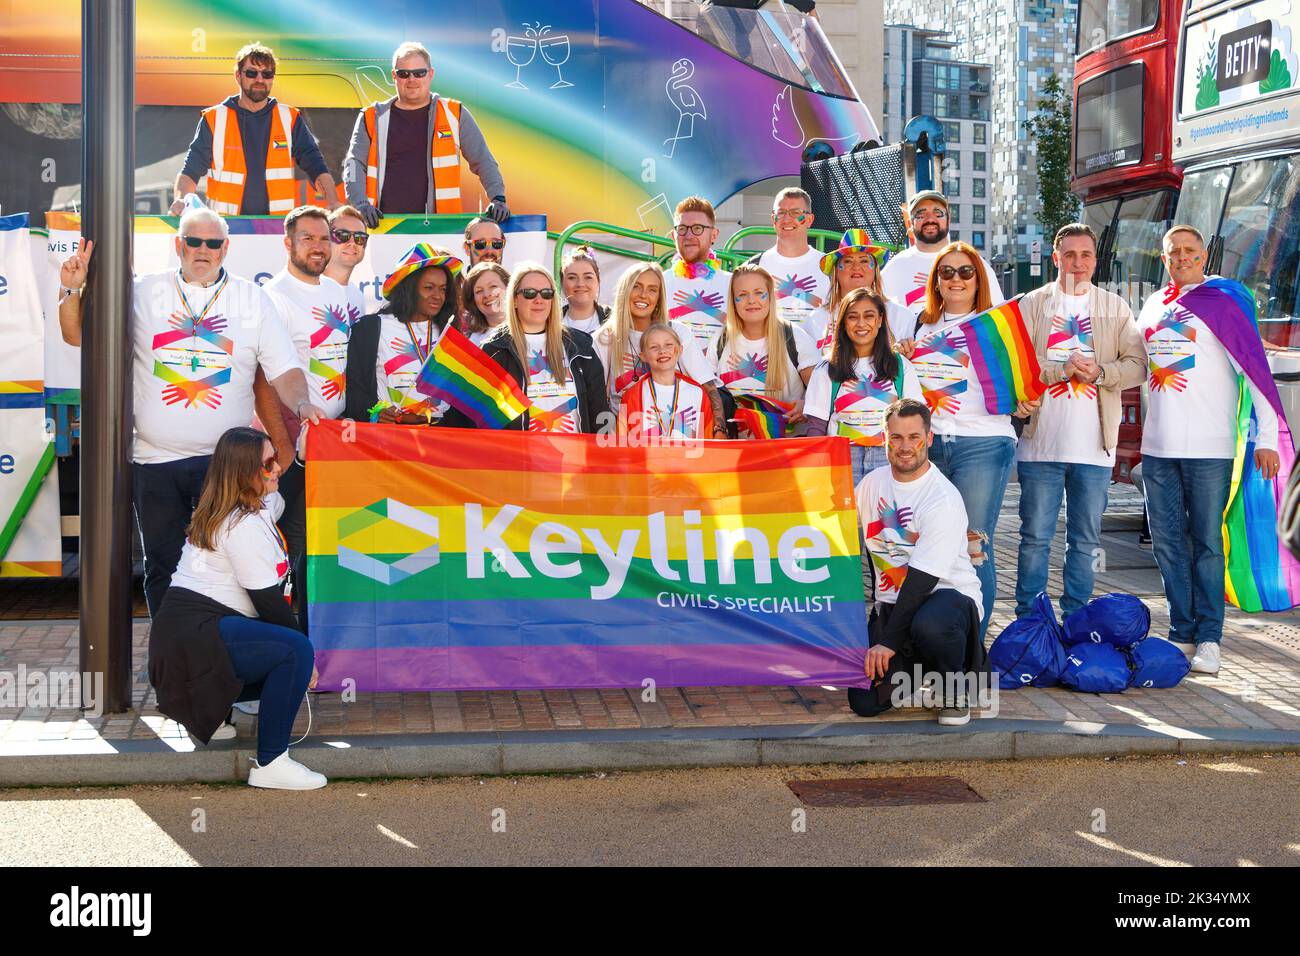 staff group from keyline civils specialist at Gay Pride parade protest 2022 in Birmingham city centre uk september 24th Stock Photo